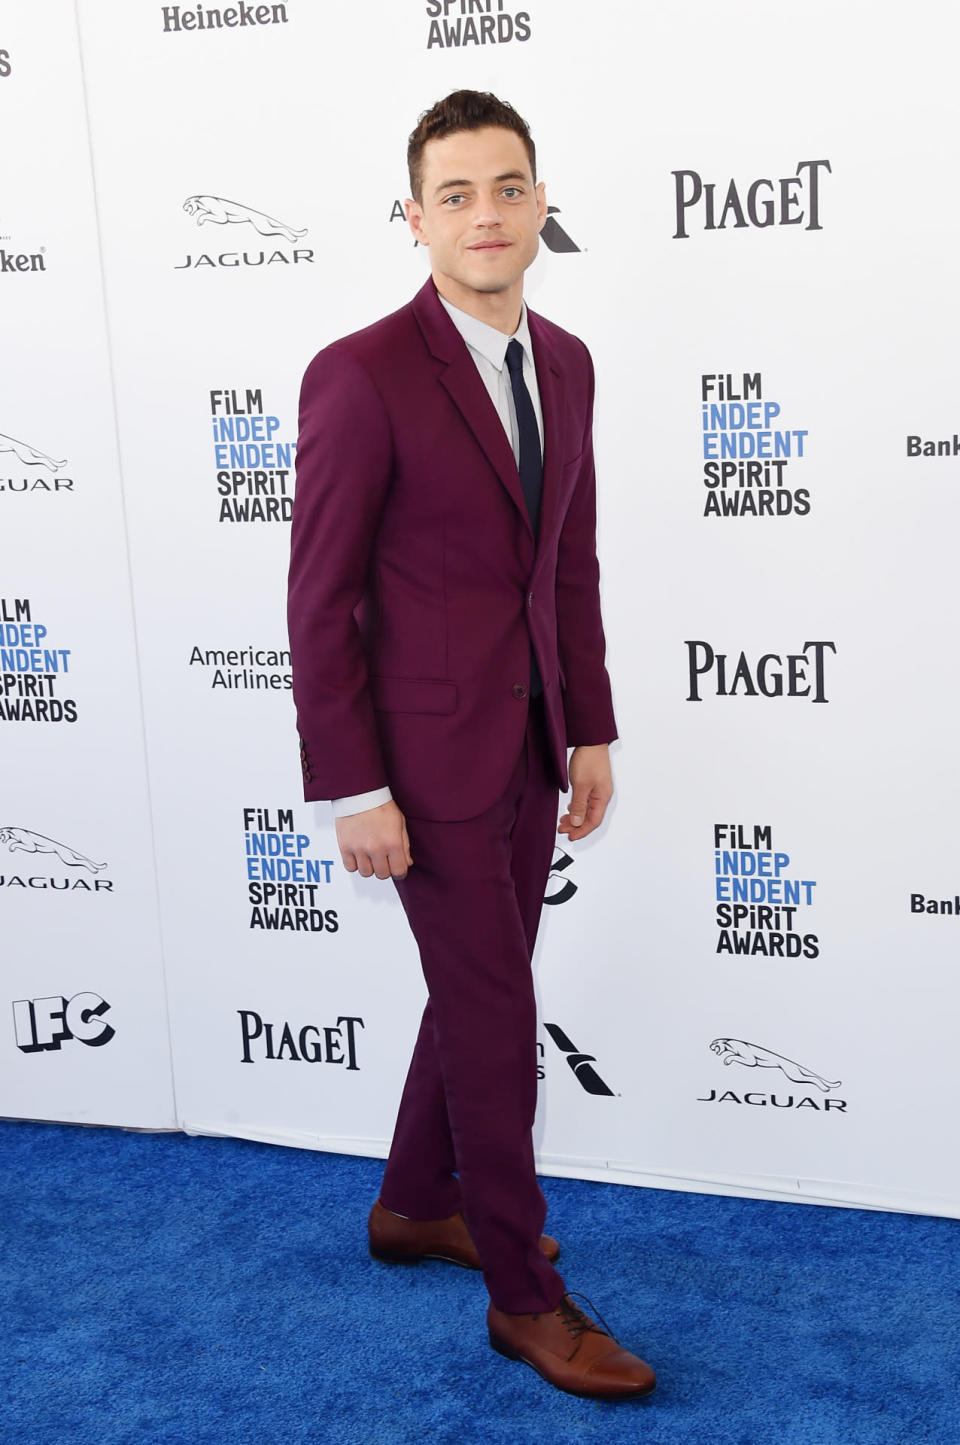 Rami Malek in a burgundy suit at the 2016 Film Independent Spirit Awards on February 27, 2016 in Santa Monica, California.